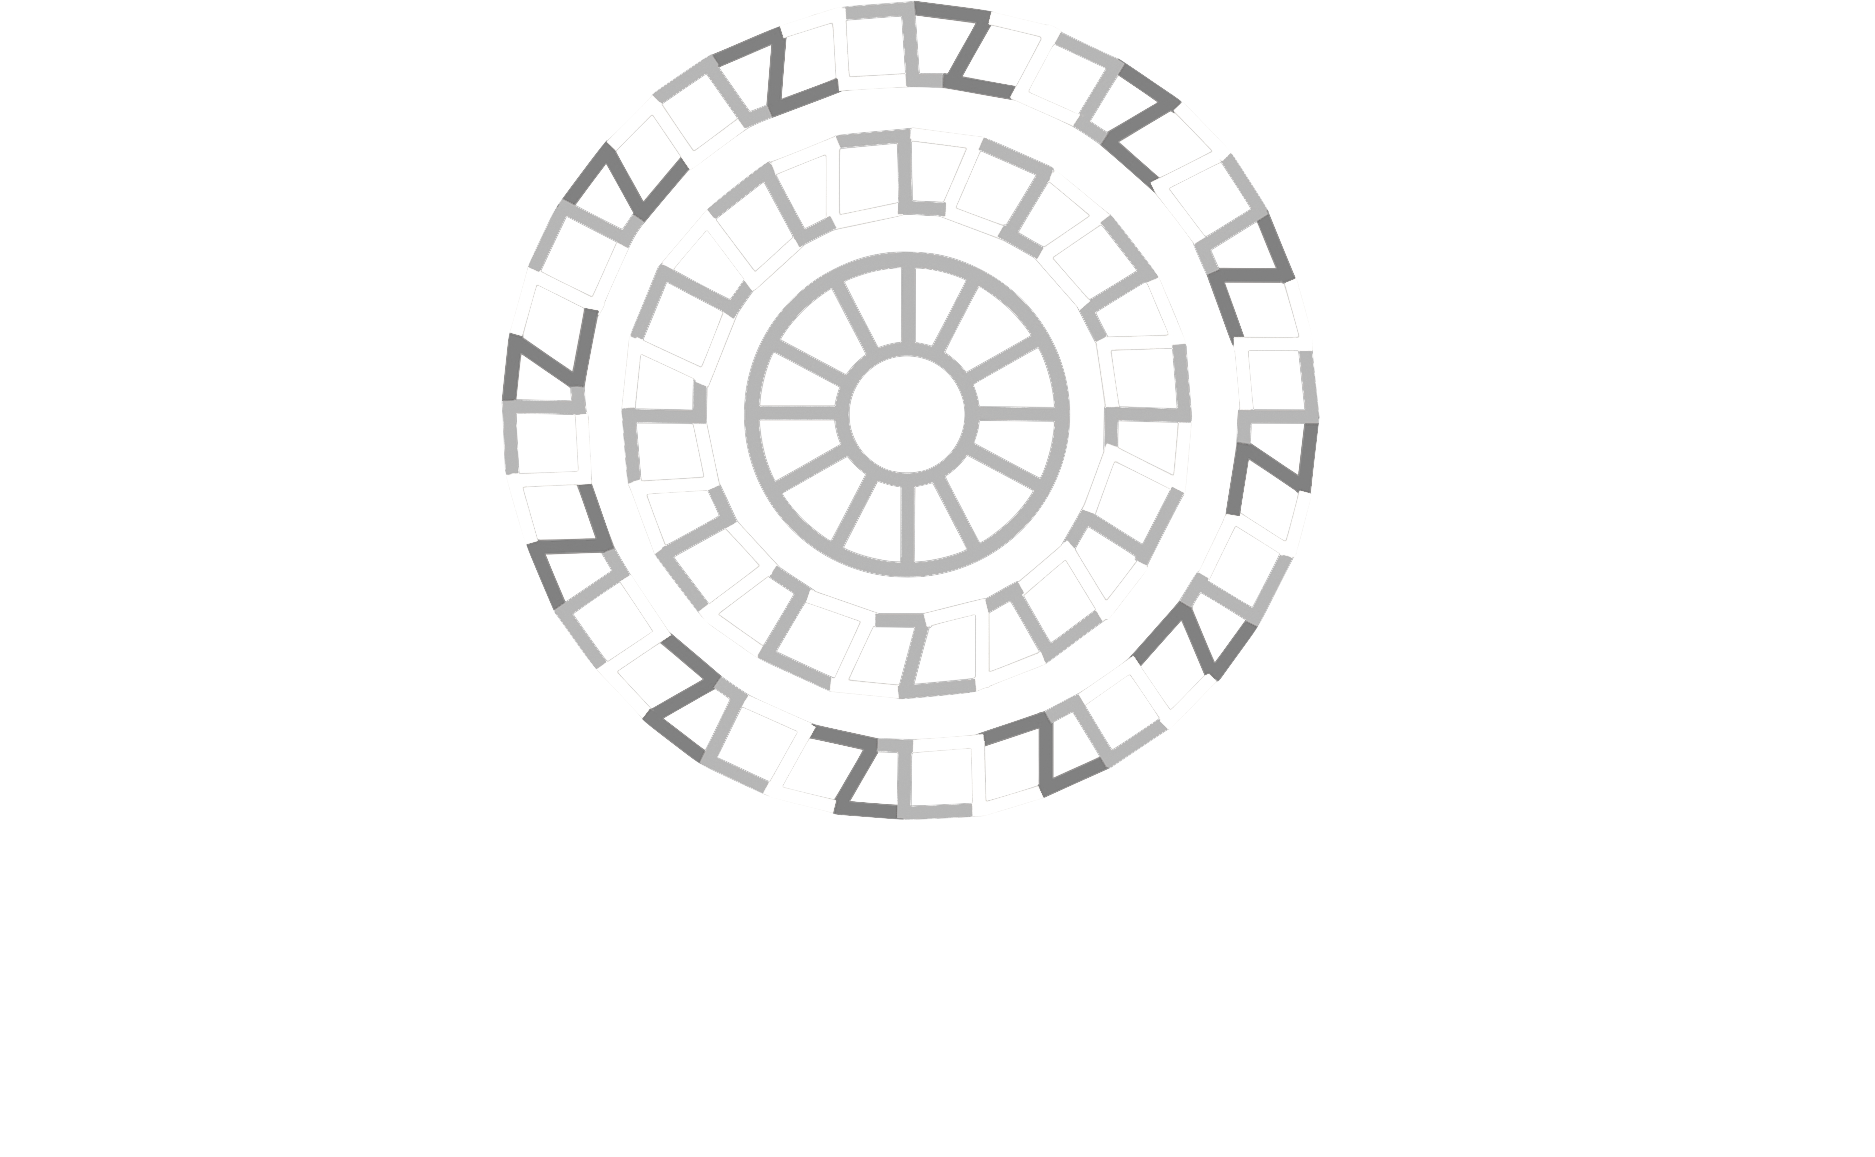 World Tourism Association for Culture and Heritage